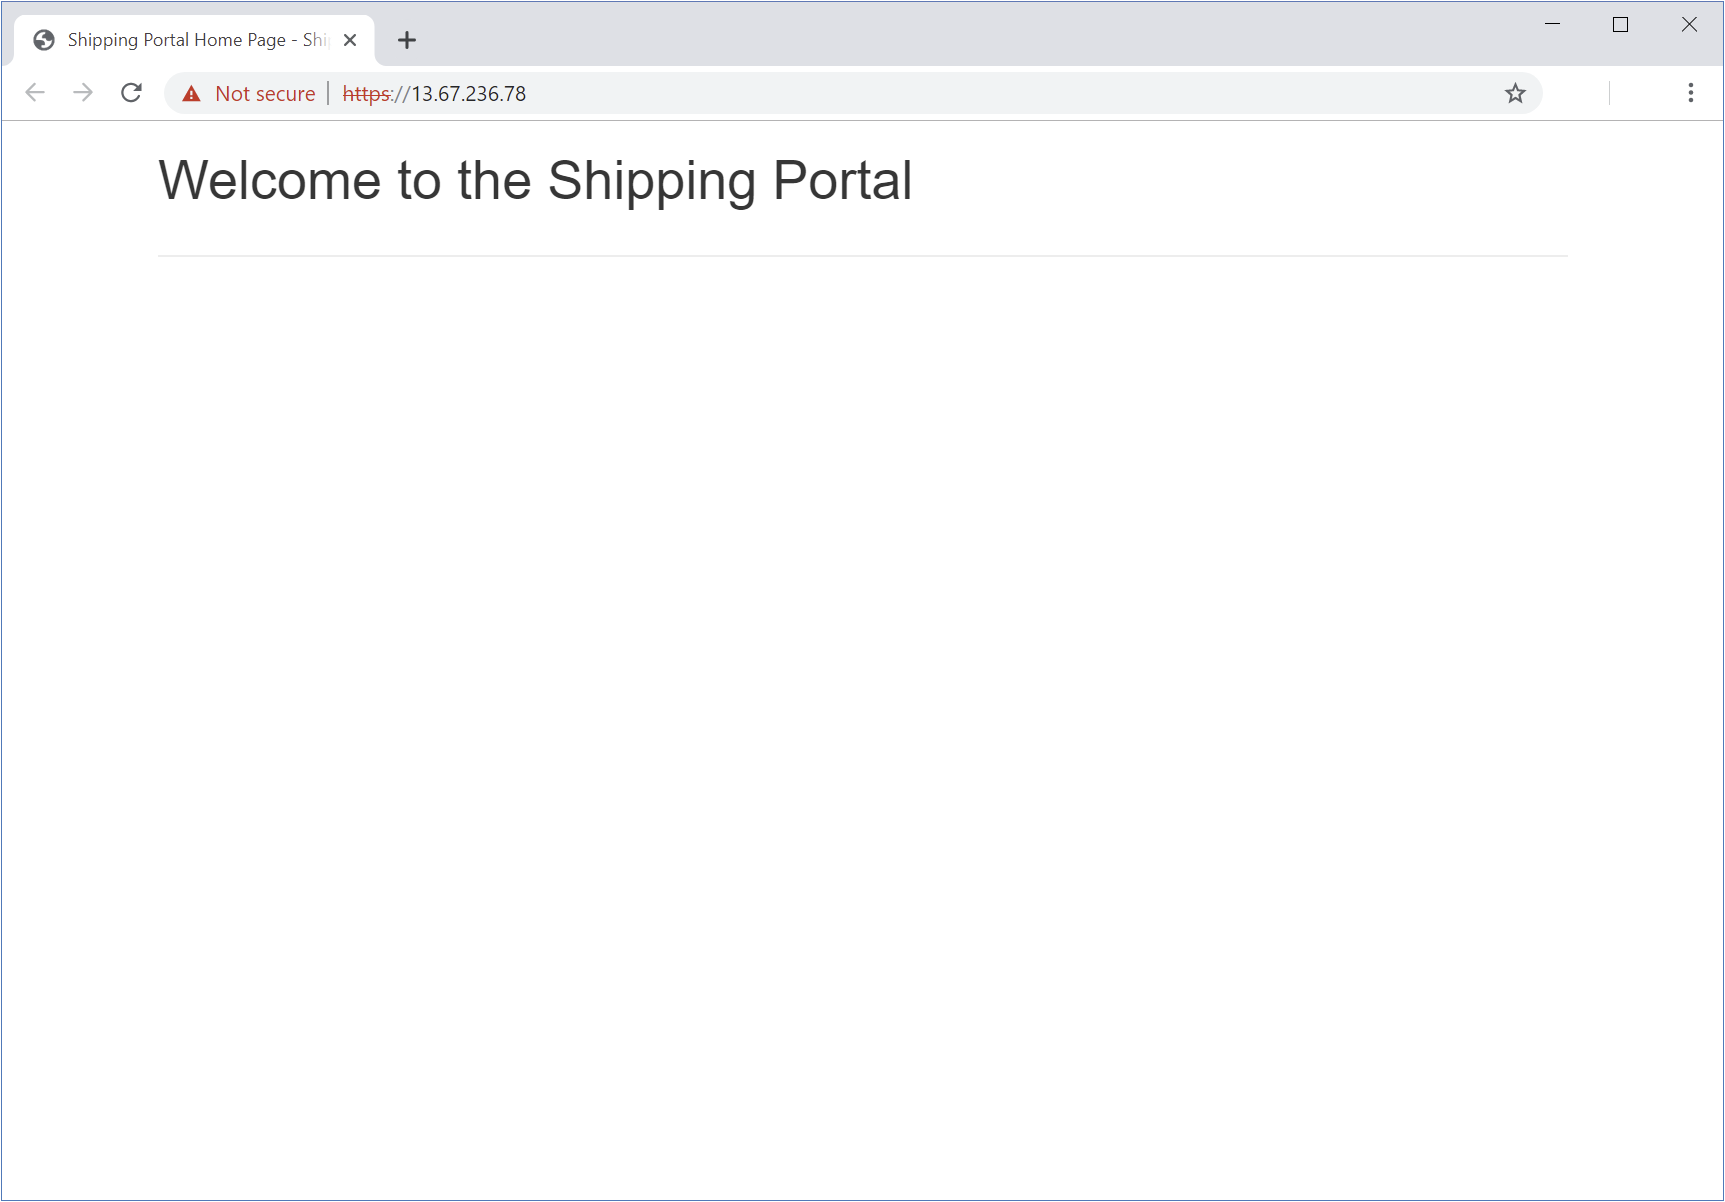 Home page for the shipping portal in Microsoft Edge.